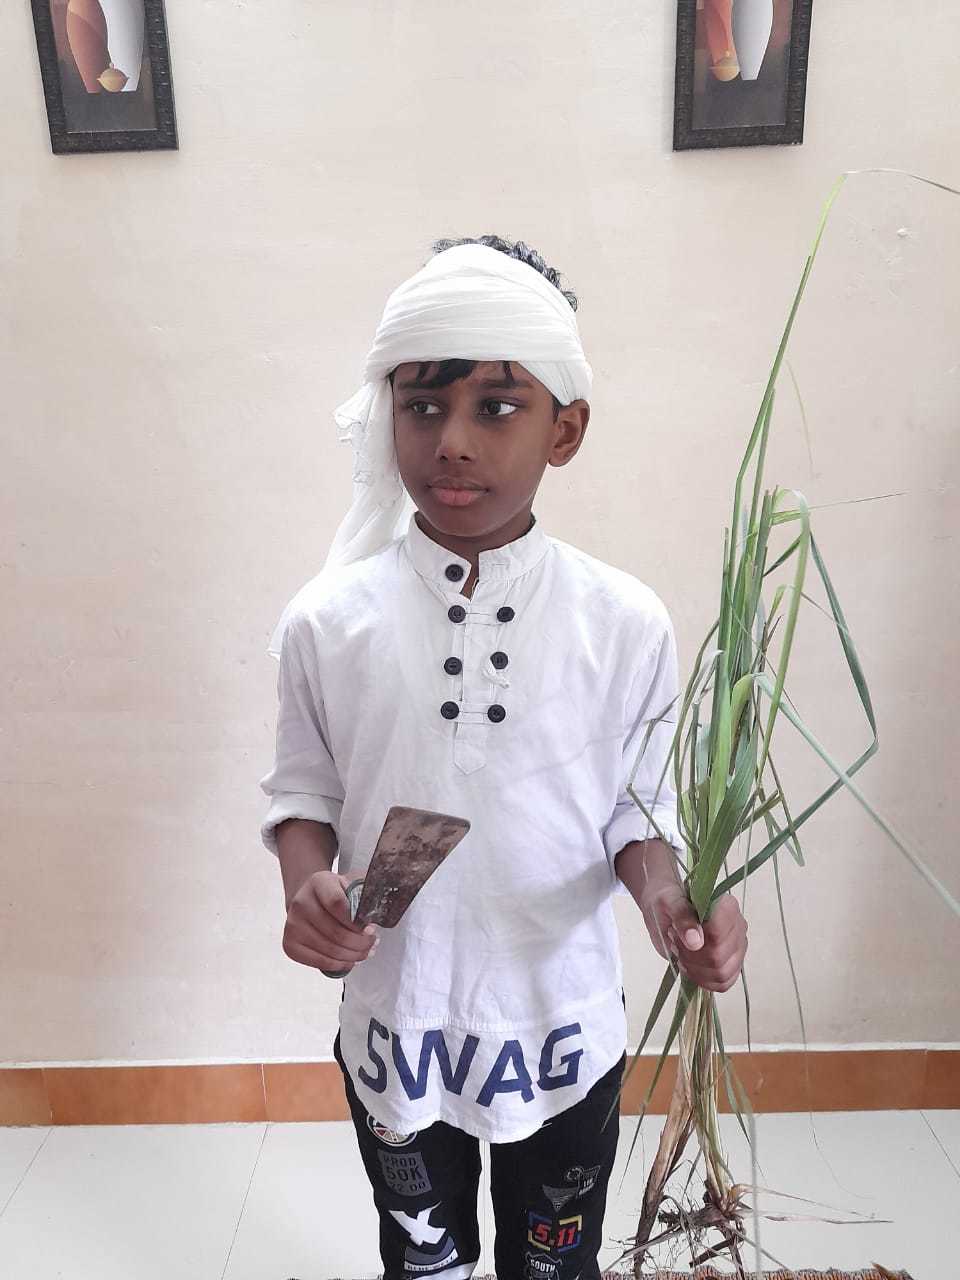 Chandar Shekhar Azad Costume For Kids/National Hero/freedom fighter Costume  For Kids Independence Day/Republic Day/School Annual function/Theme  party/Competition/Stage Shows Dress